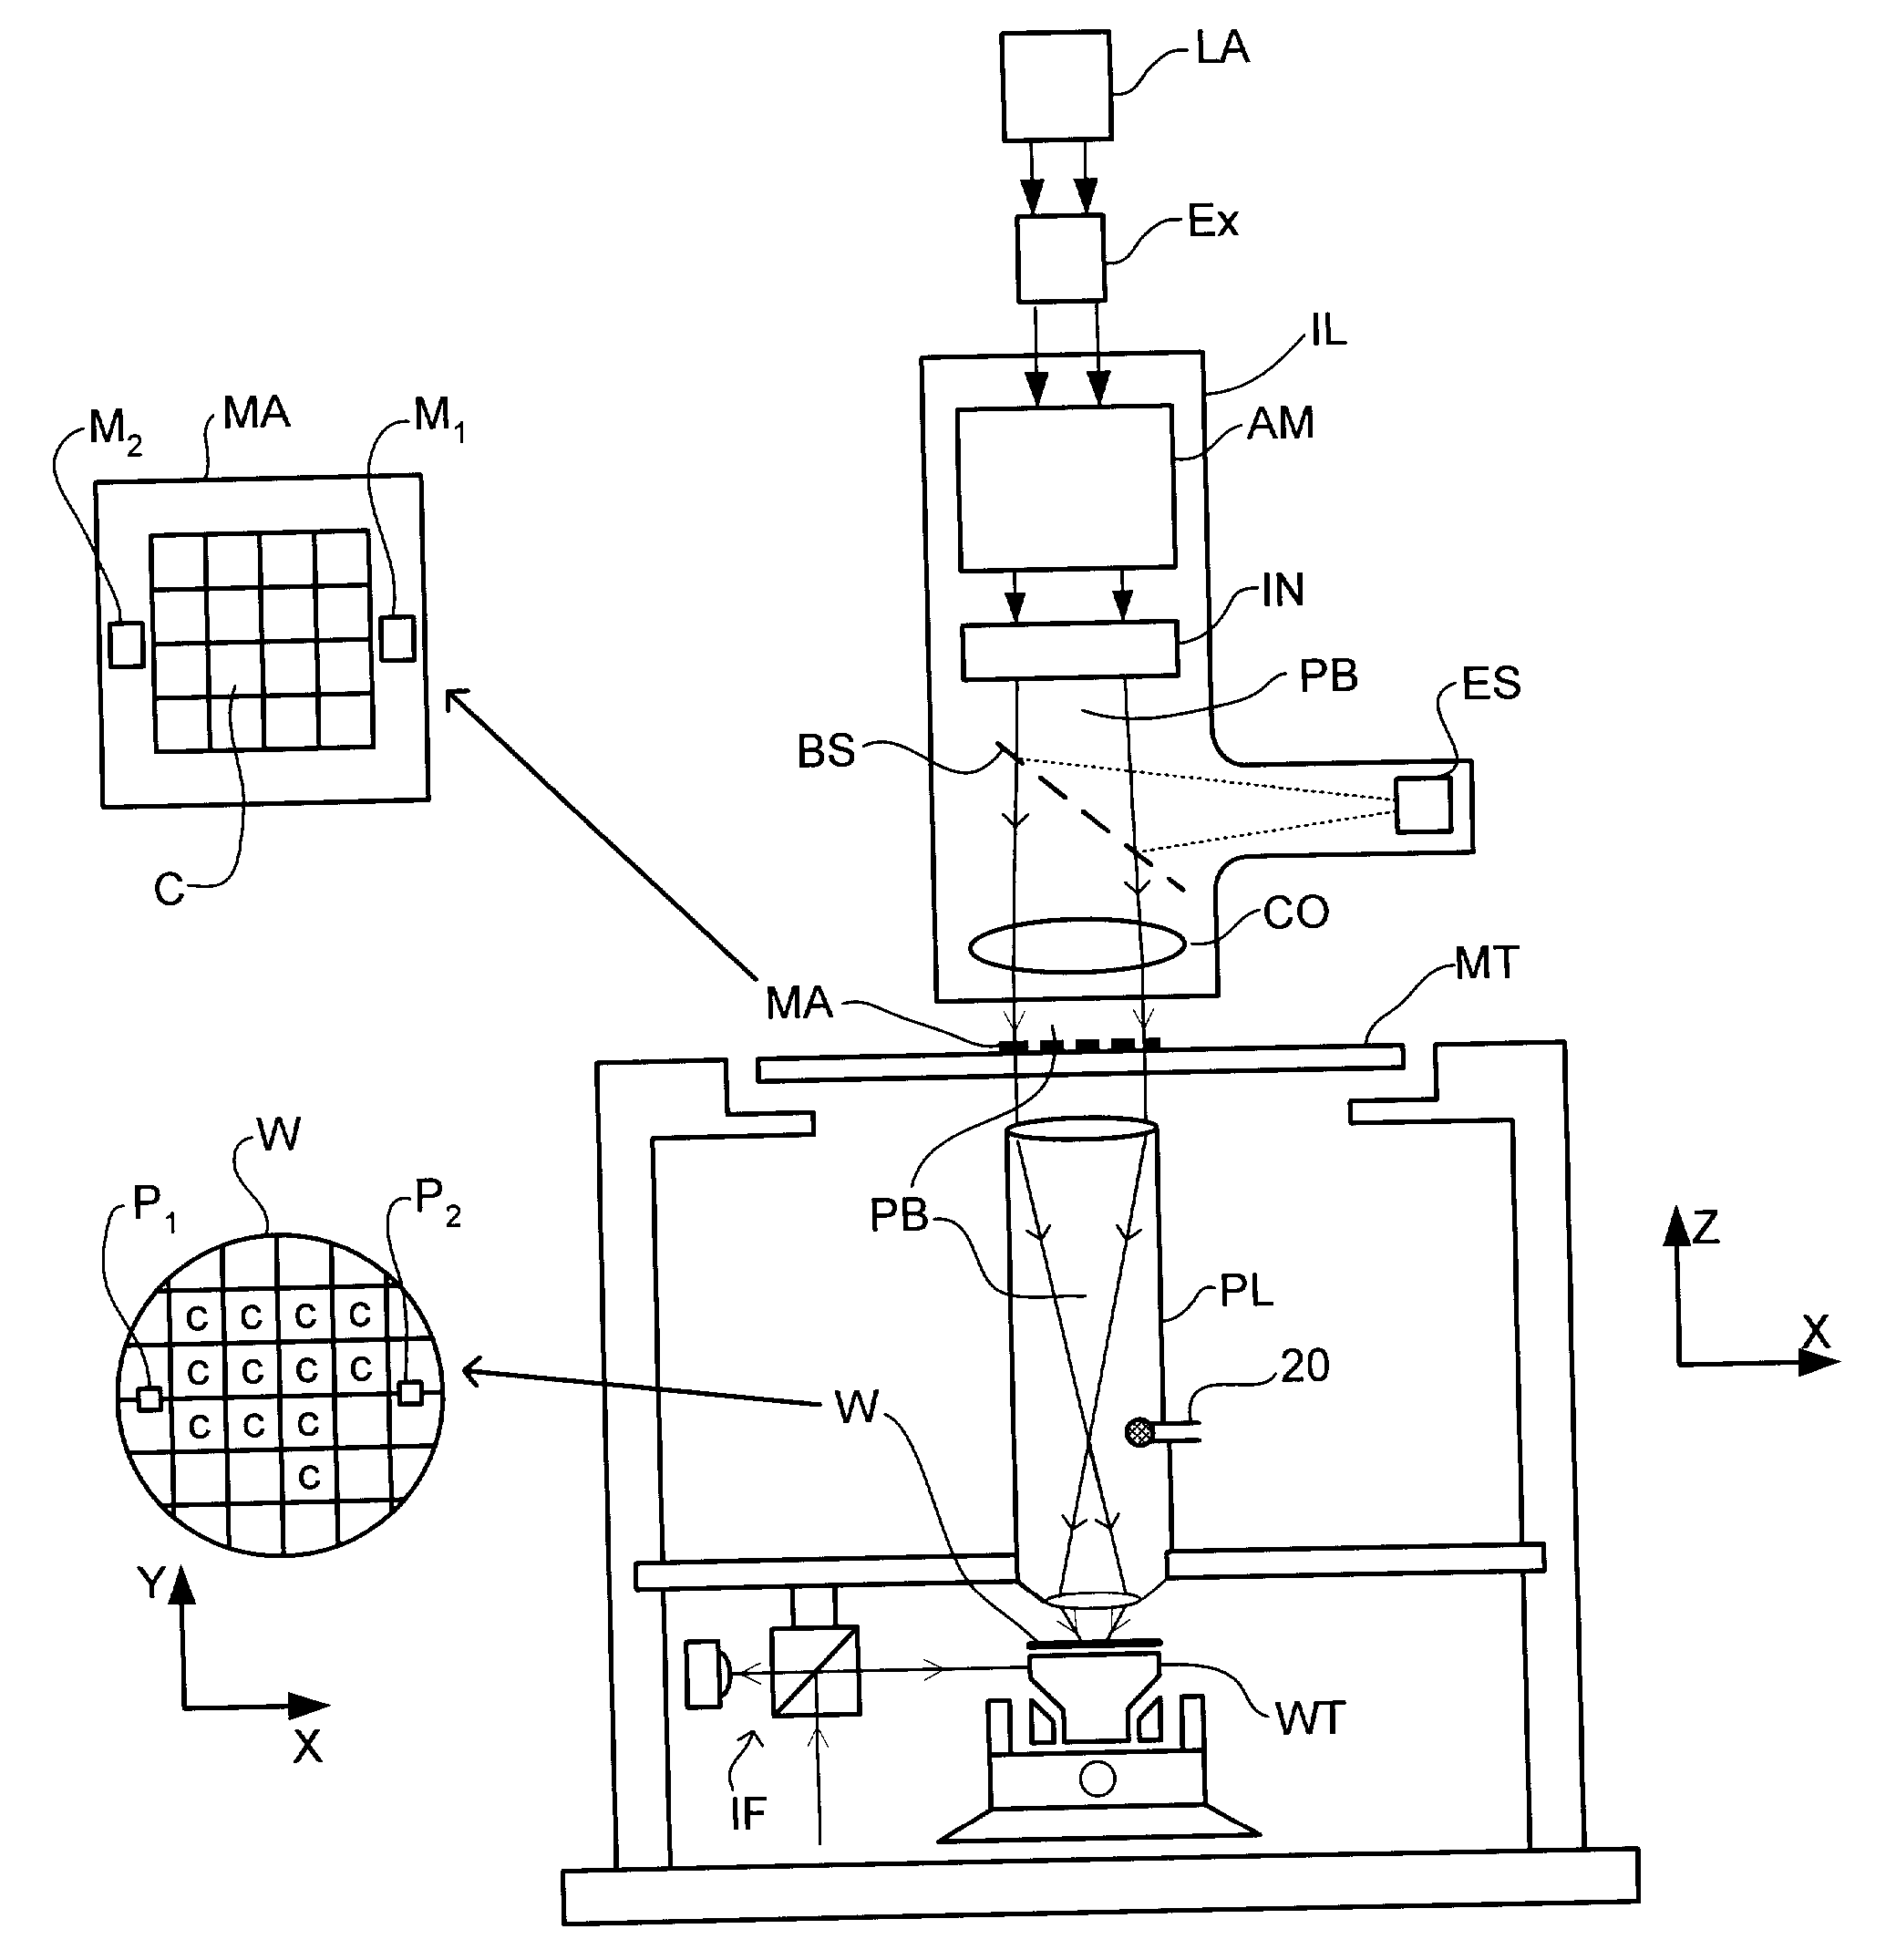 Lithographic apparatus, integrated circuit device manufacturing method, and integrated circuit device manufactured thereby